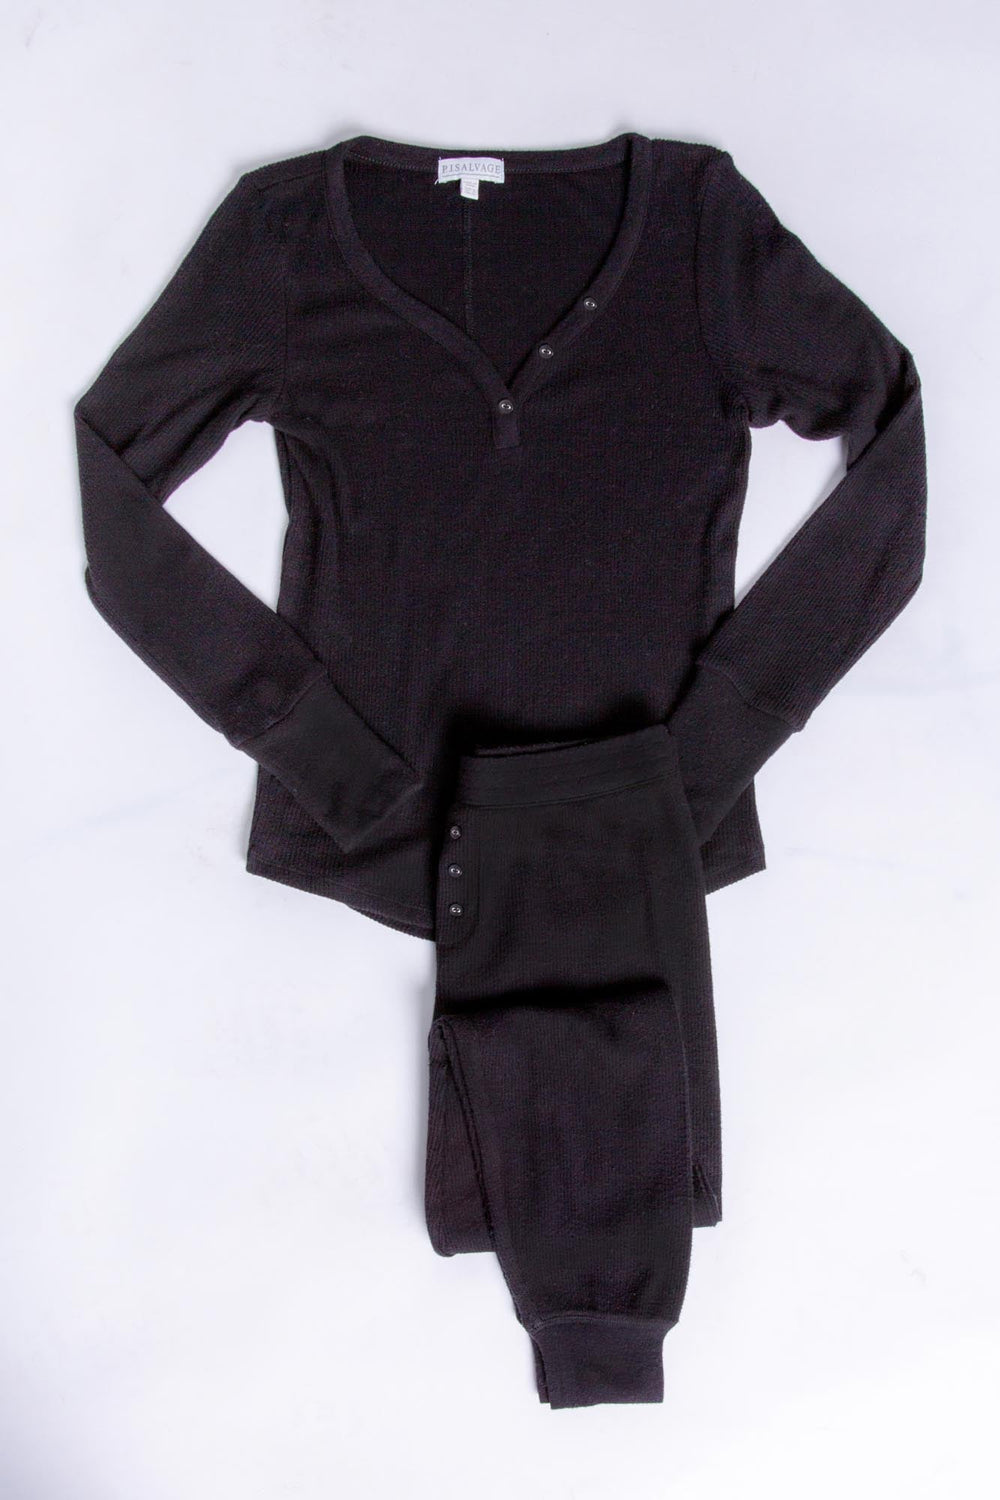 Lounge set in black 2x2 rib peachy knit. Long sleeve V-neck Henley & banded jammie pant. (6612551893092) (6970035896420)